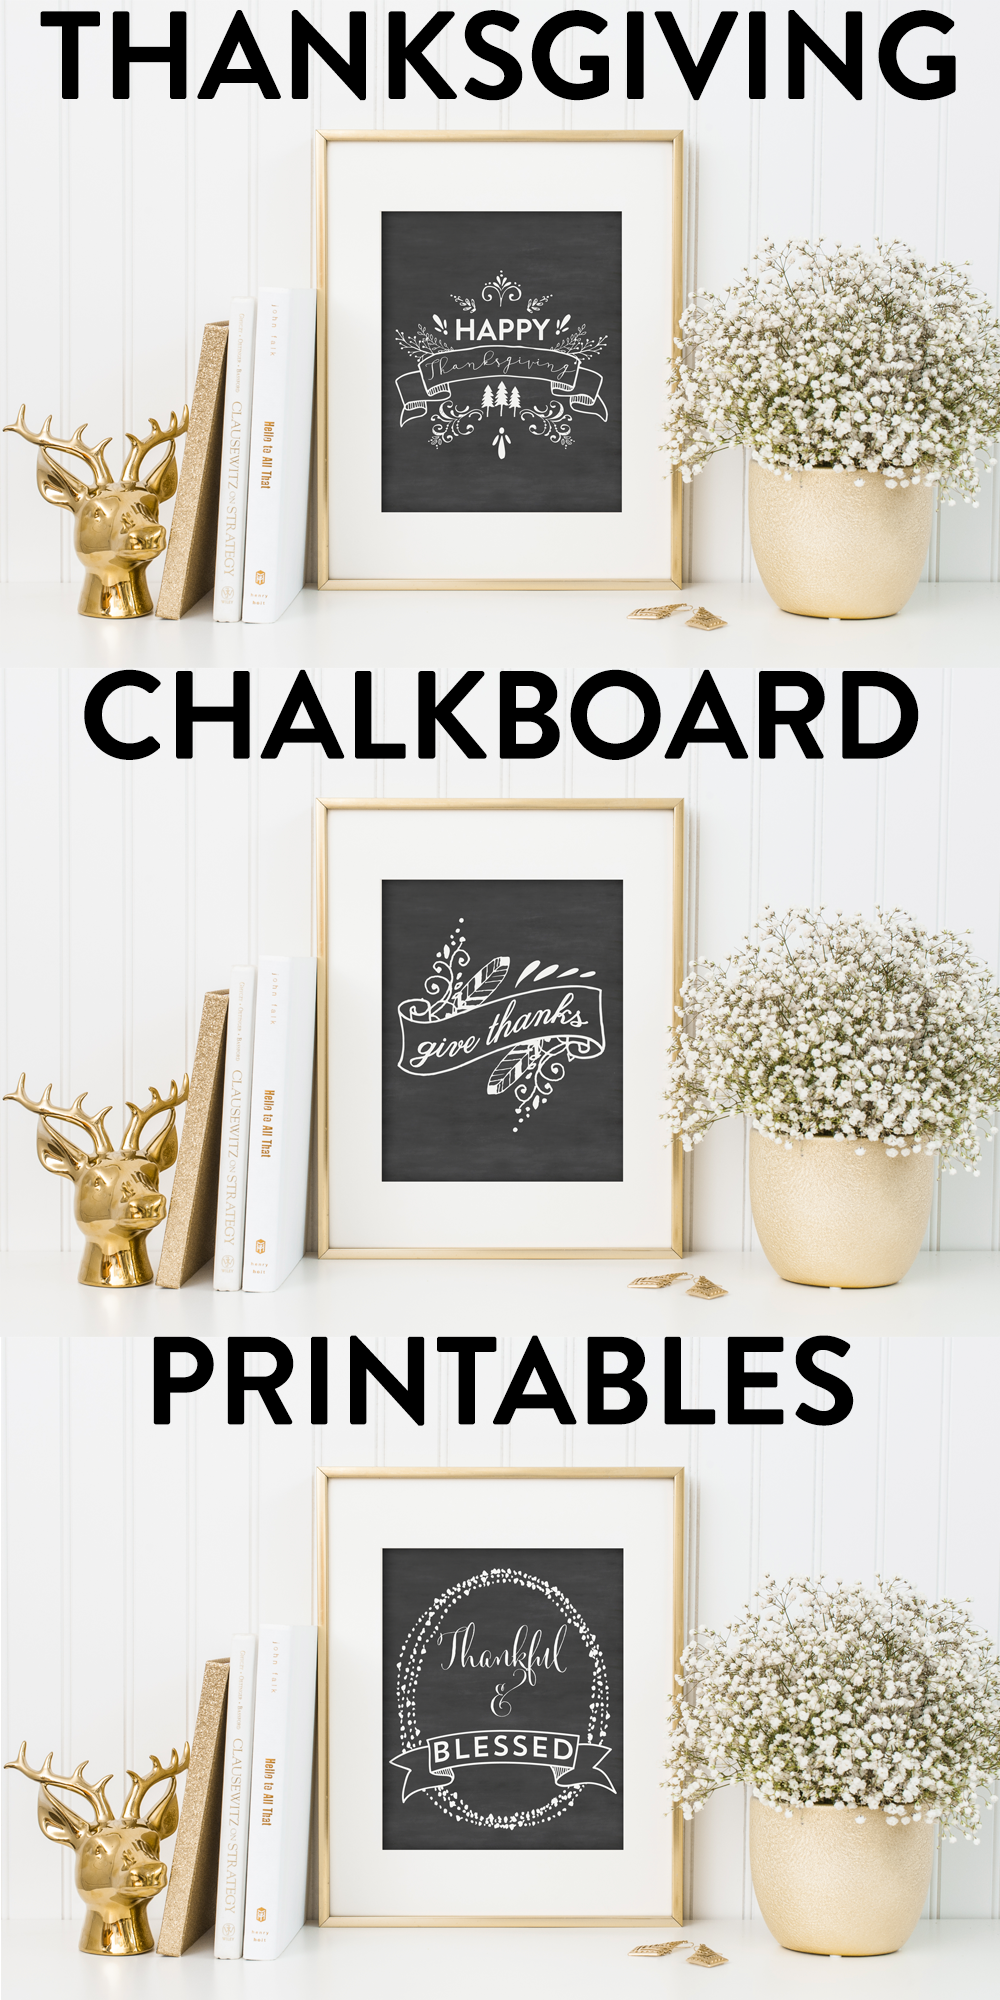 Get these wonderful Thanksgiving chalkboard printables and celebrate the season in style! 3 different printables, all 8x10 inches!